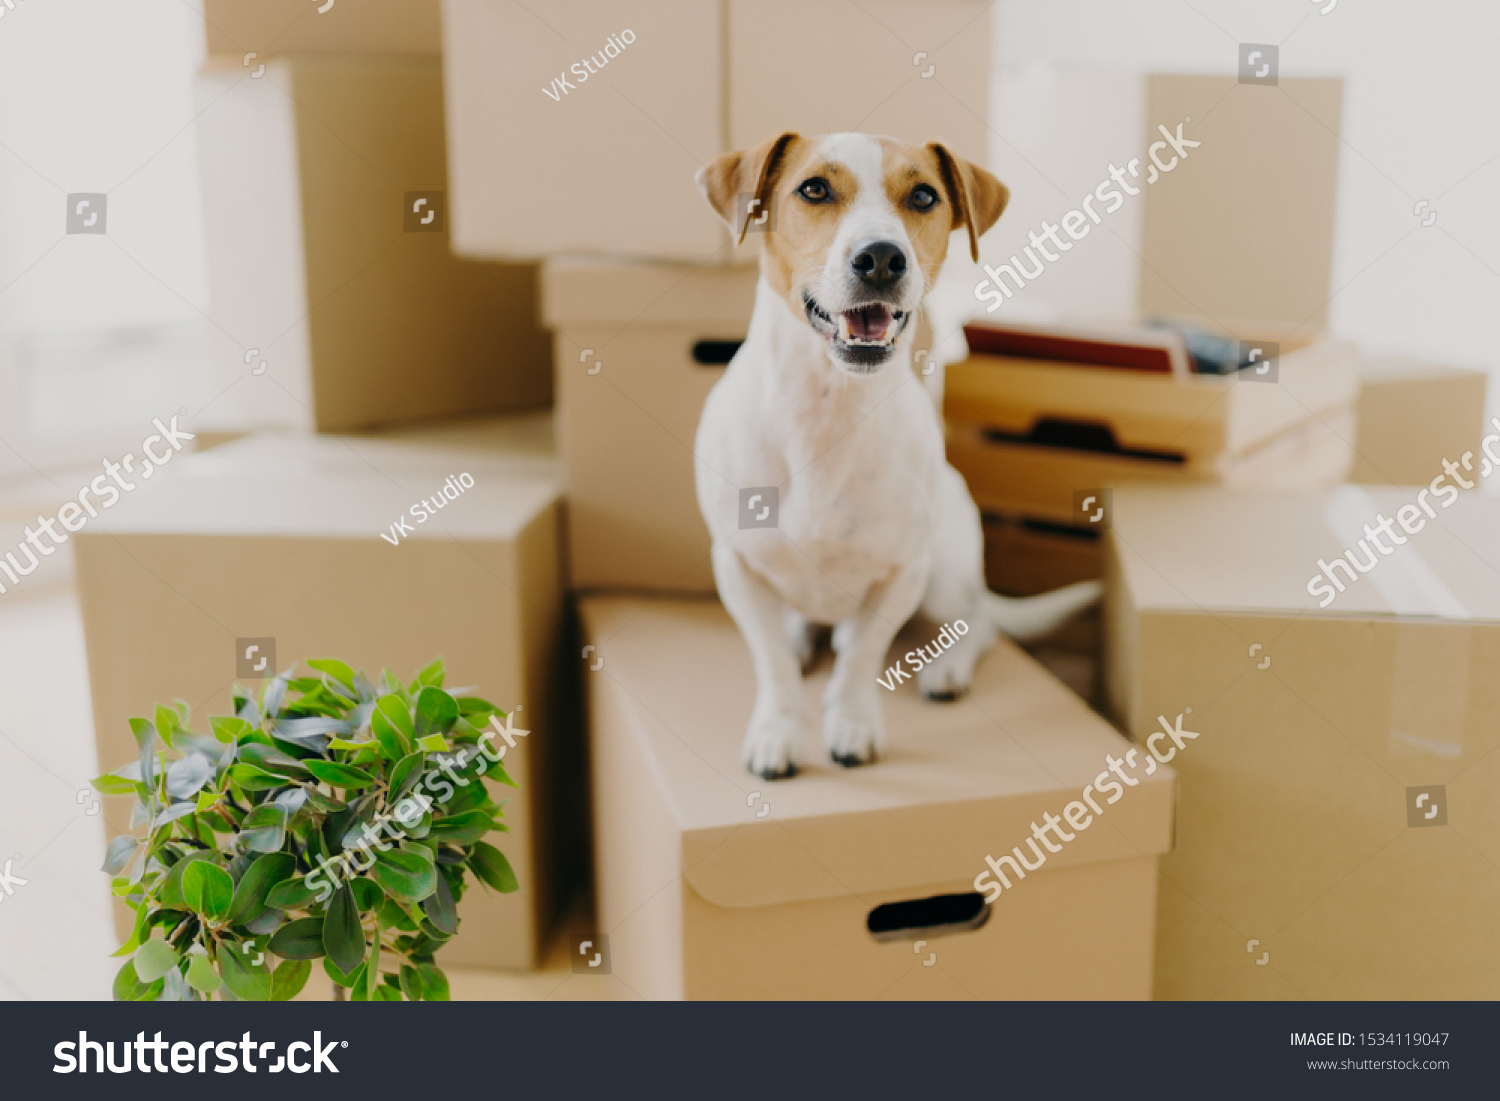 Funny dog sits on carton boxes, green indoor plant near, relocates in new modern apartment, has brown ears, white fur, happy to live in expensive house. Animals, moving day and housing concept #1534119047